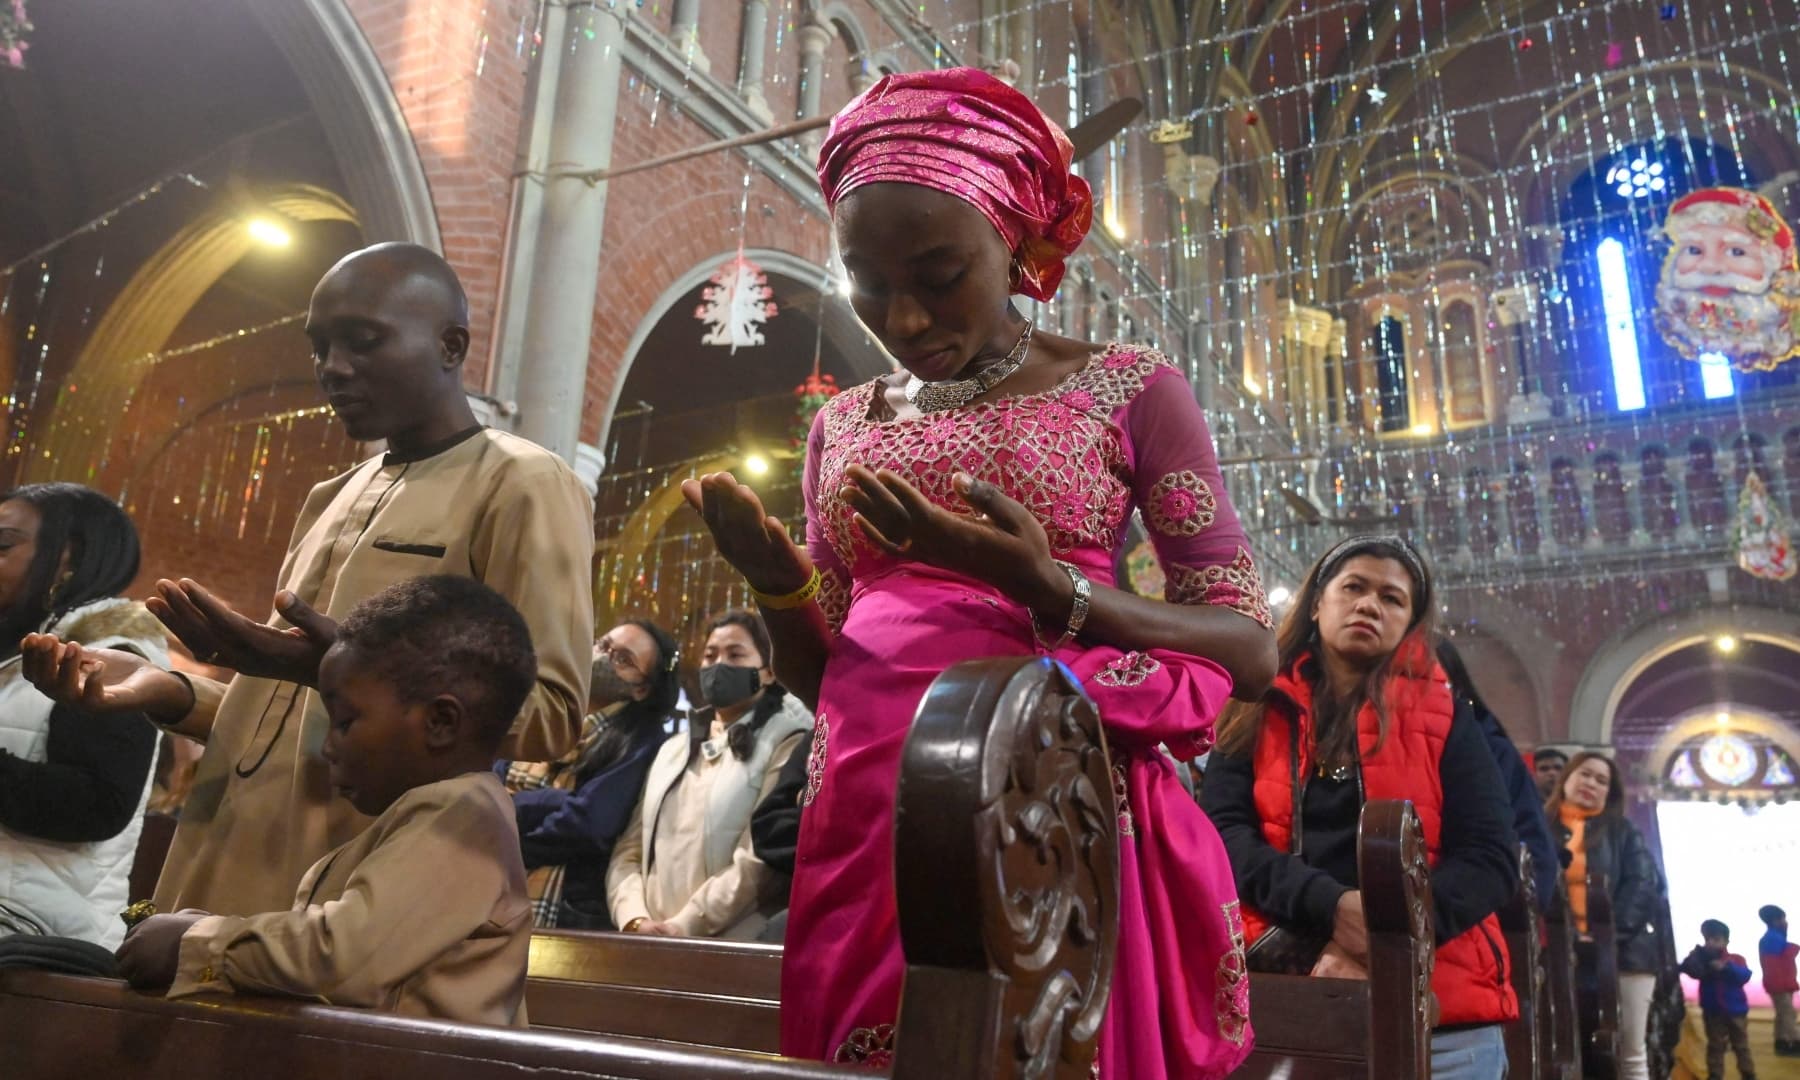 Christian devotees attend a prayer service at Sacred Heart Cathedral to celebrate Christmas in Lahore on December 25, 2021. — AFP